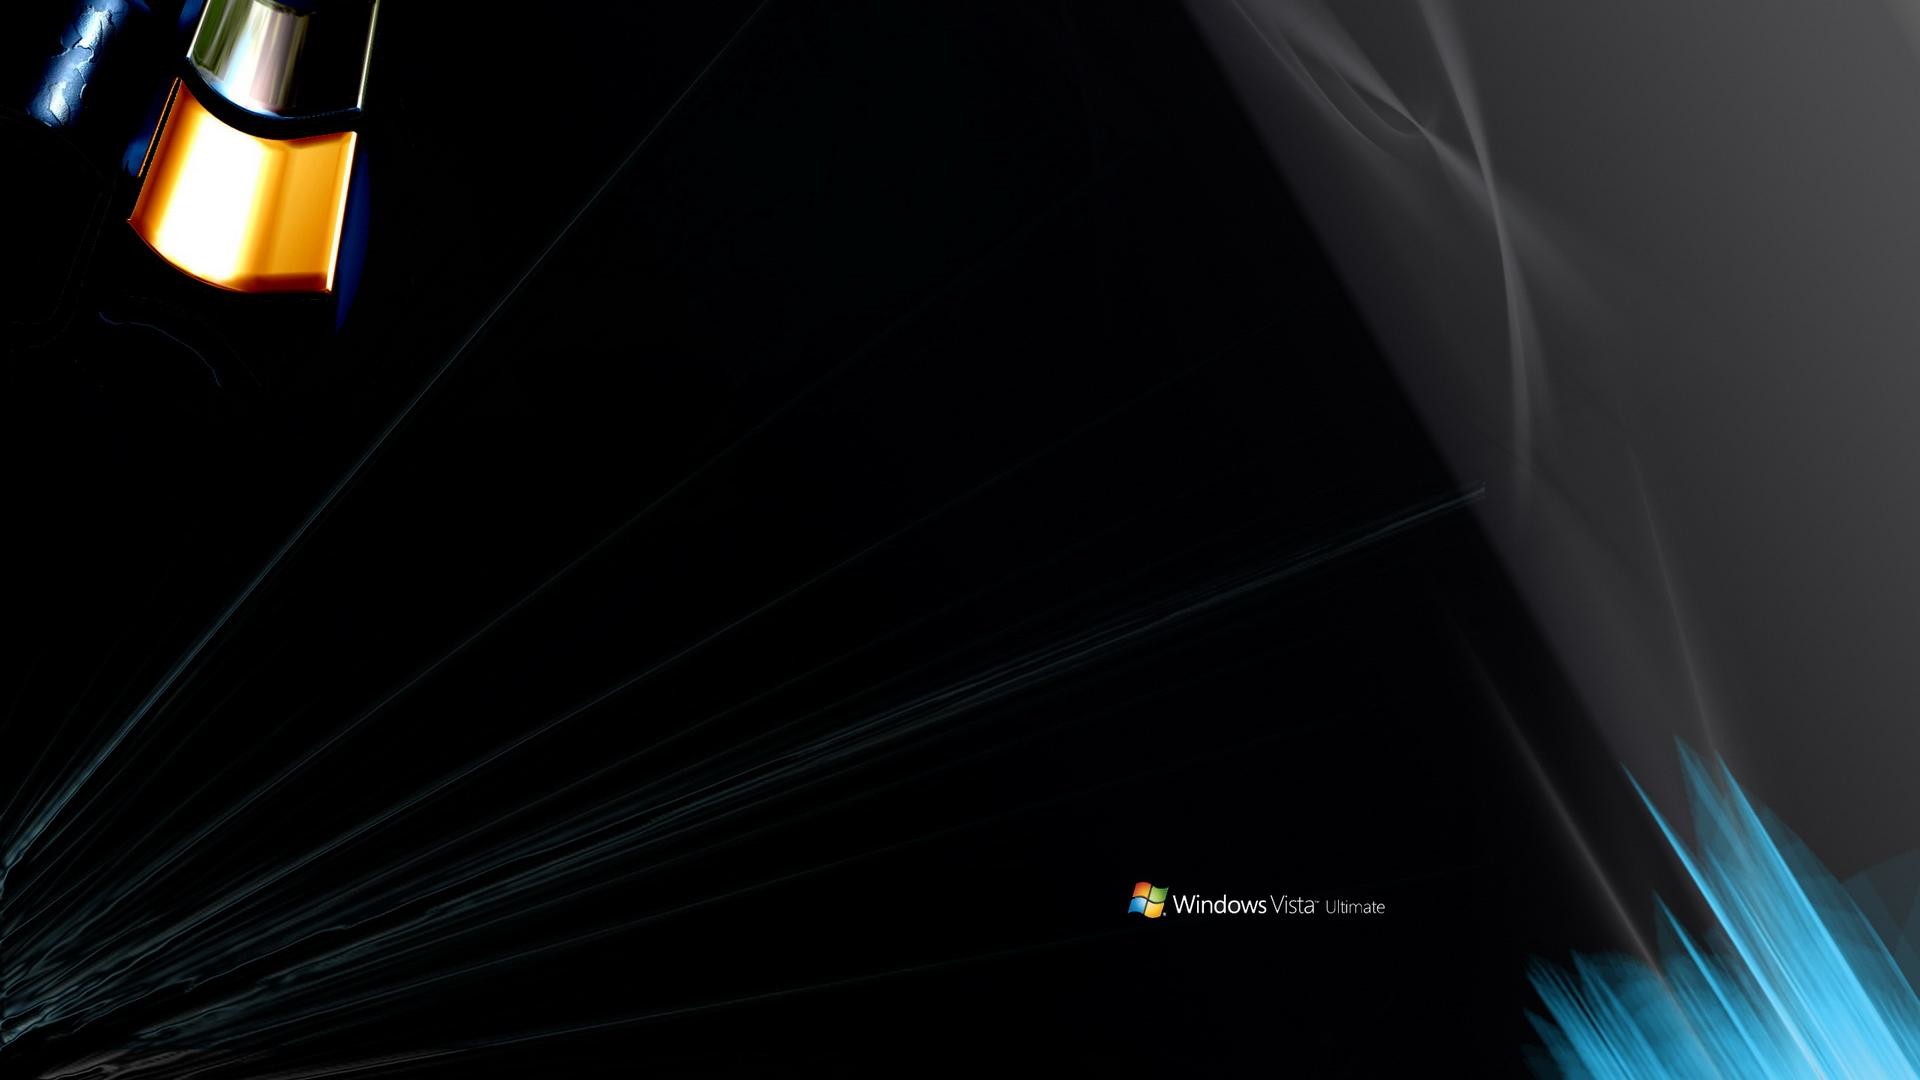 Windows 7 Ultimate Wallpaper HD (50+ images)